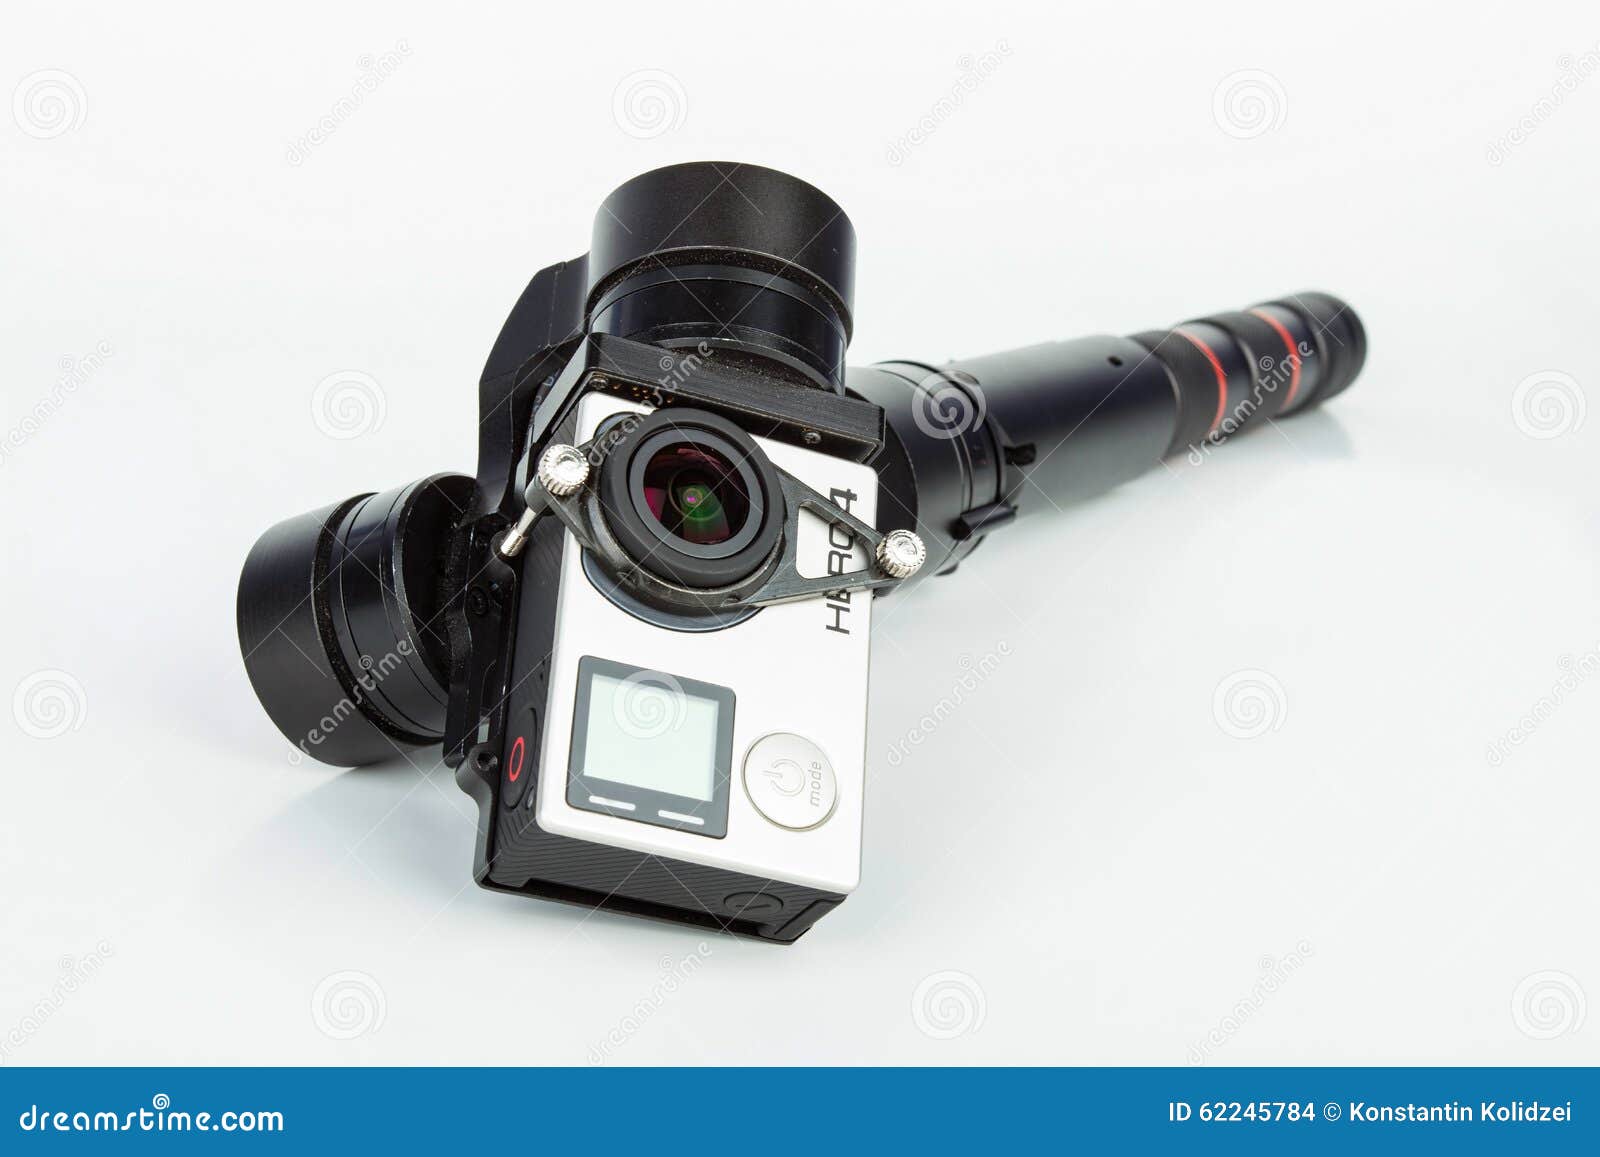 Go Pro Hero 4 Black Edition with Gimbal. Editorial Stock Image ...